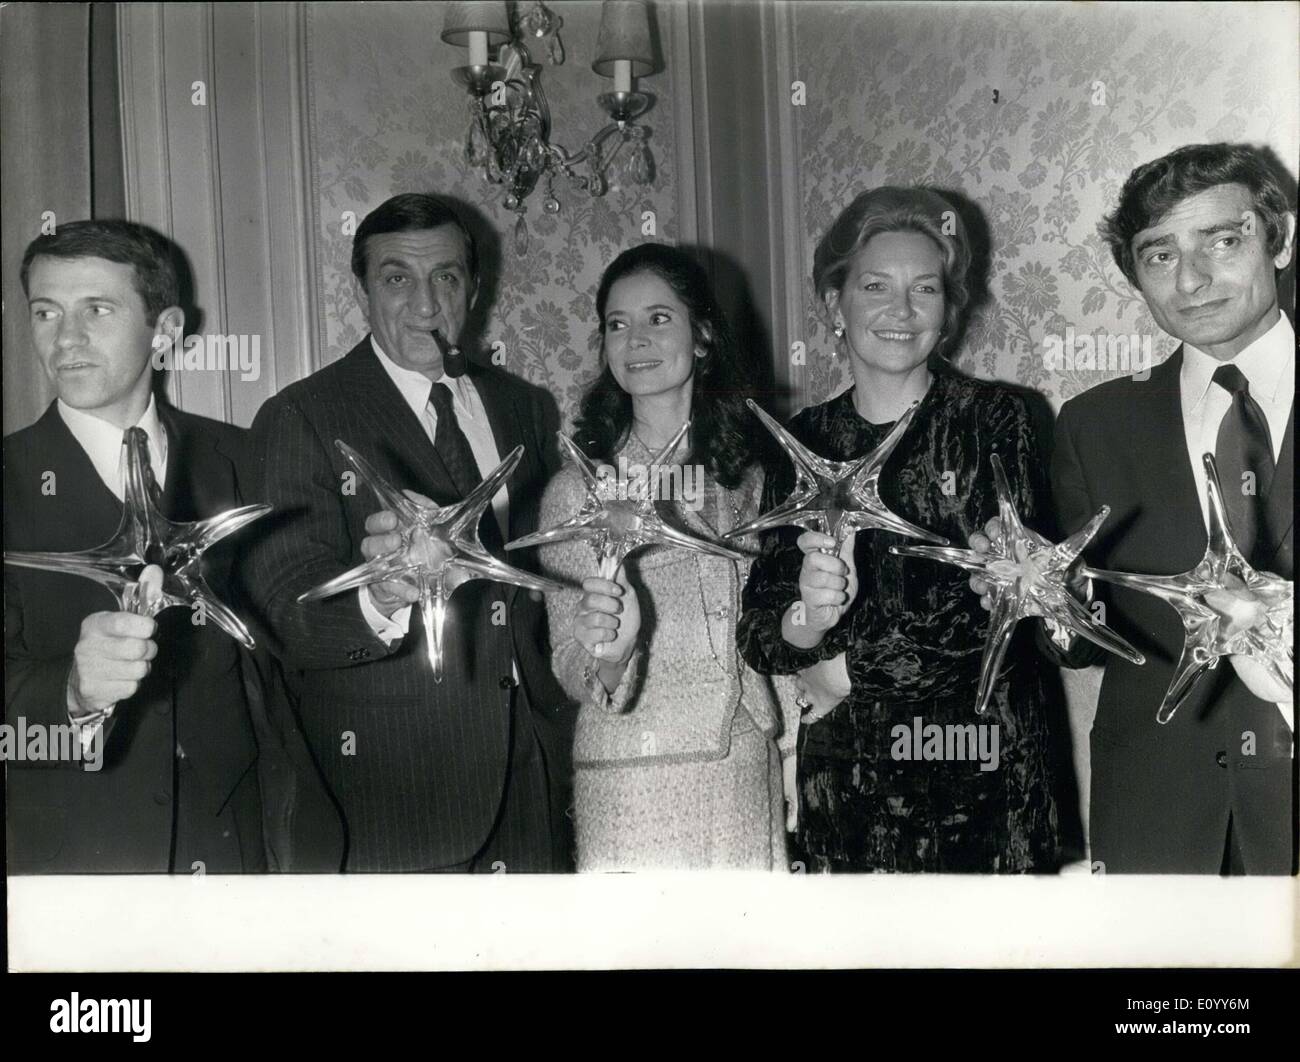 Nov. 10, 1971 - After a dinner at Lasserre, Georges Auric, President of the Academy of the Cinema, gave out the crystal stars to several winners. Pictured from left to right with their stars: Bernard Paul (grand prize for his movie ''Time to Live''), Lino Ventura (for his role in ''Army of Shadows''), Marie Jose Nat (for her role in ''Elise, or Real Life) , Odile Versois (for her role in ''Time to Live'', & Charles Denner (for his role in ''The Crook' Stock Photo